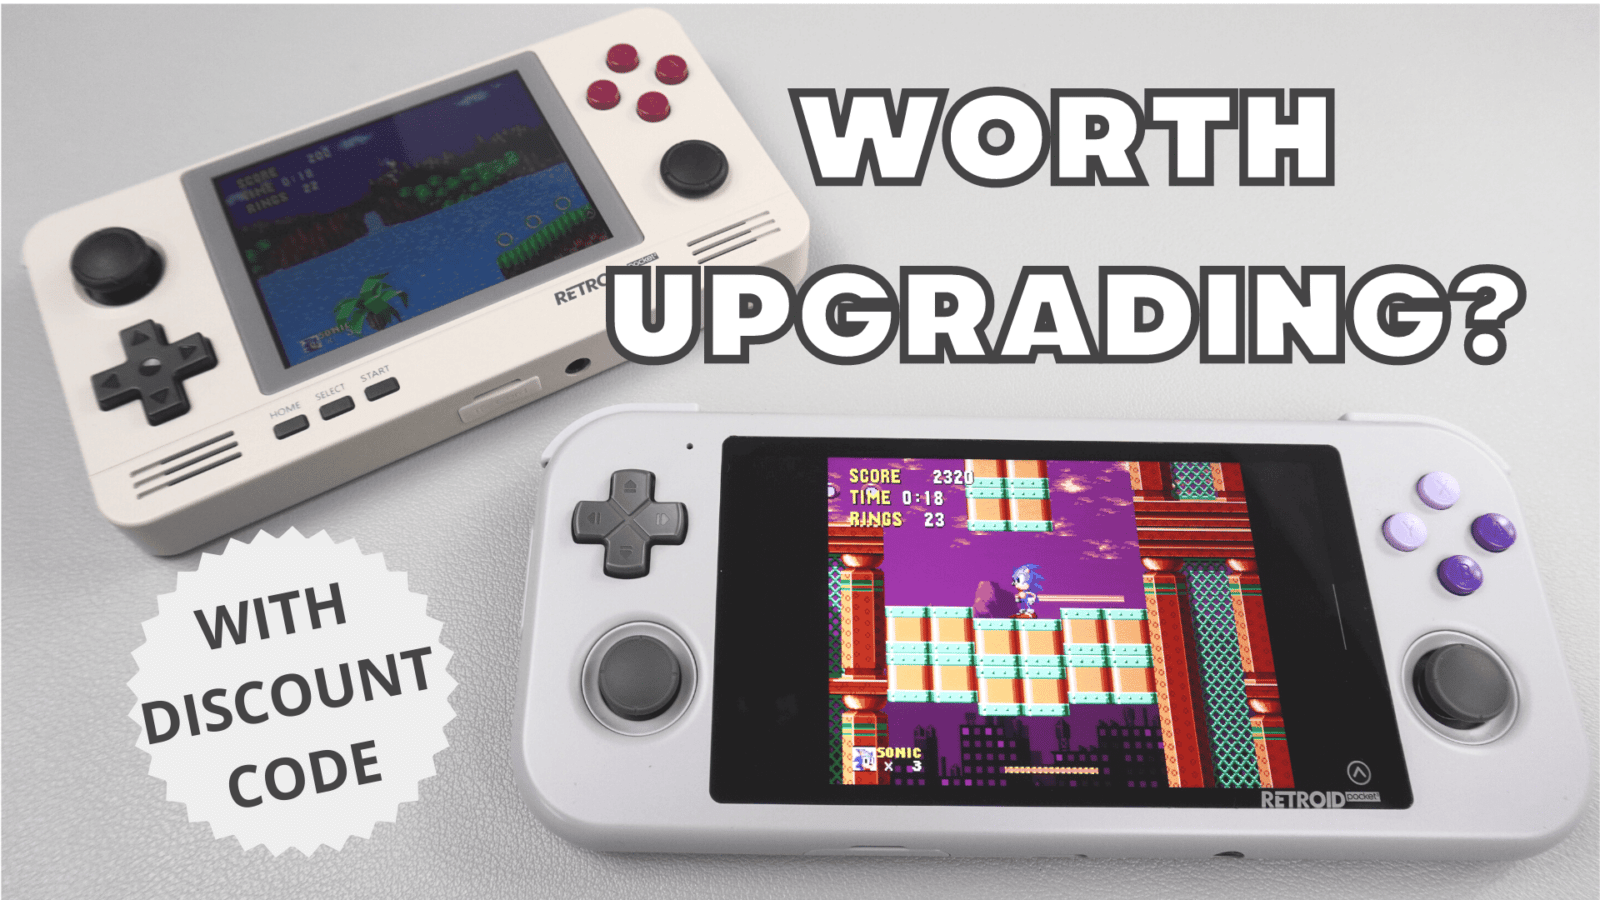 Retroid Pocket 3 Review - Android retro gaming handheld - DroiX